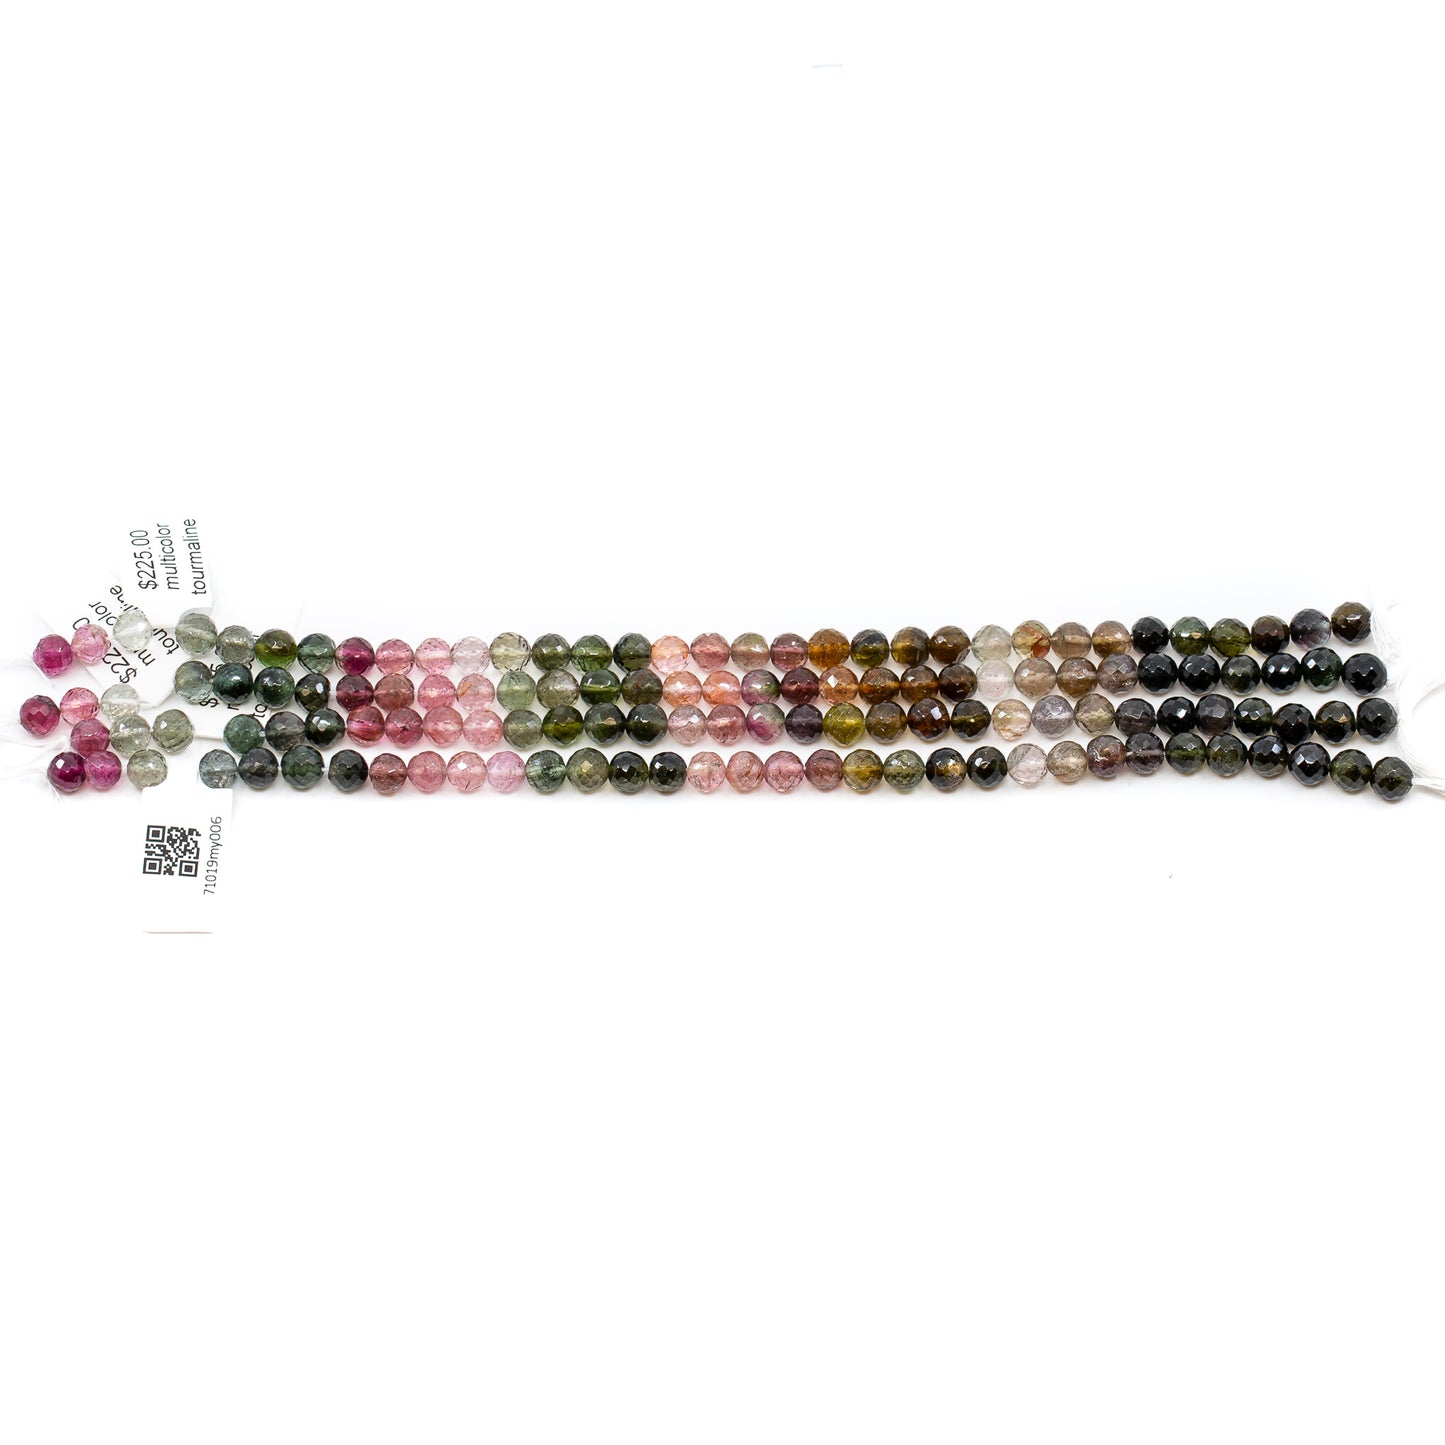 Multicolor Tourmaline 5.5mm Faceted Round Bead - 6.75" Strand